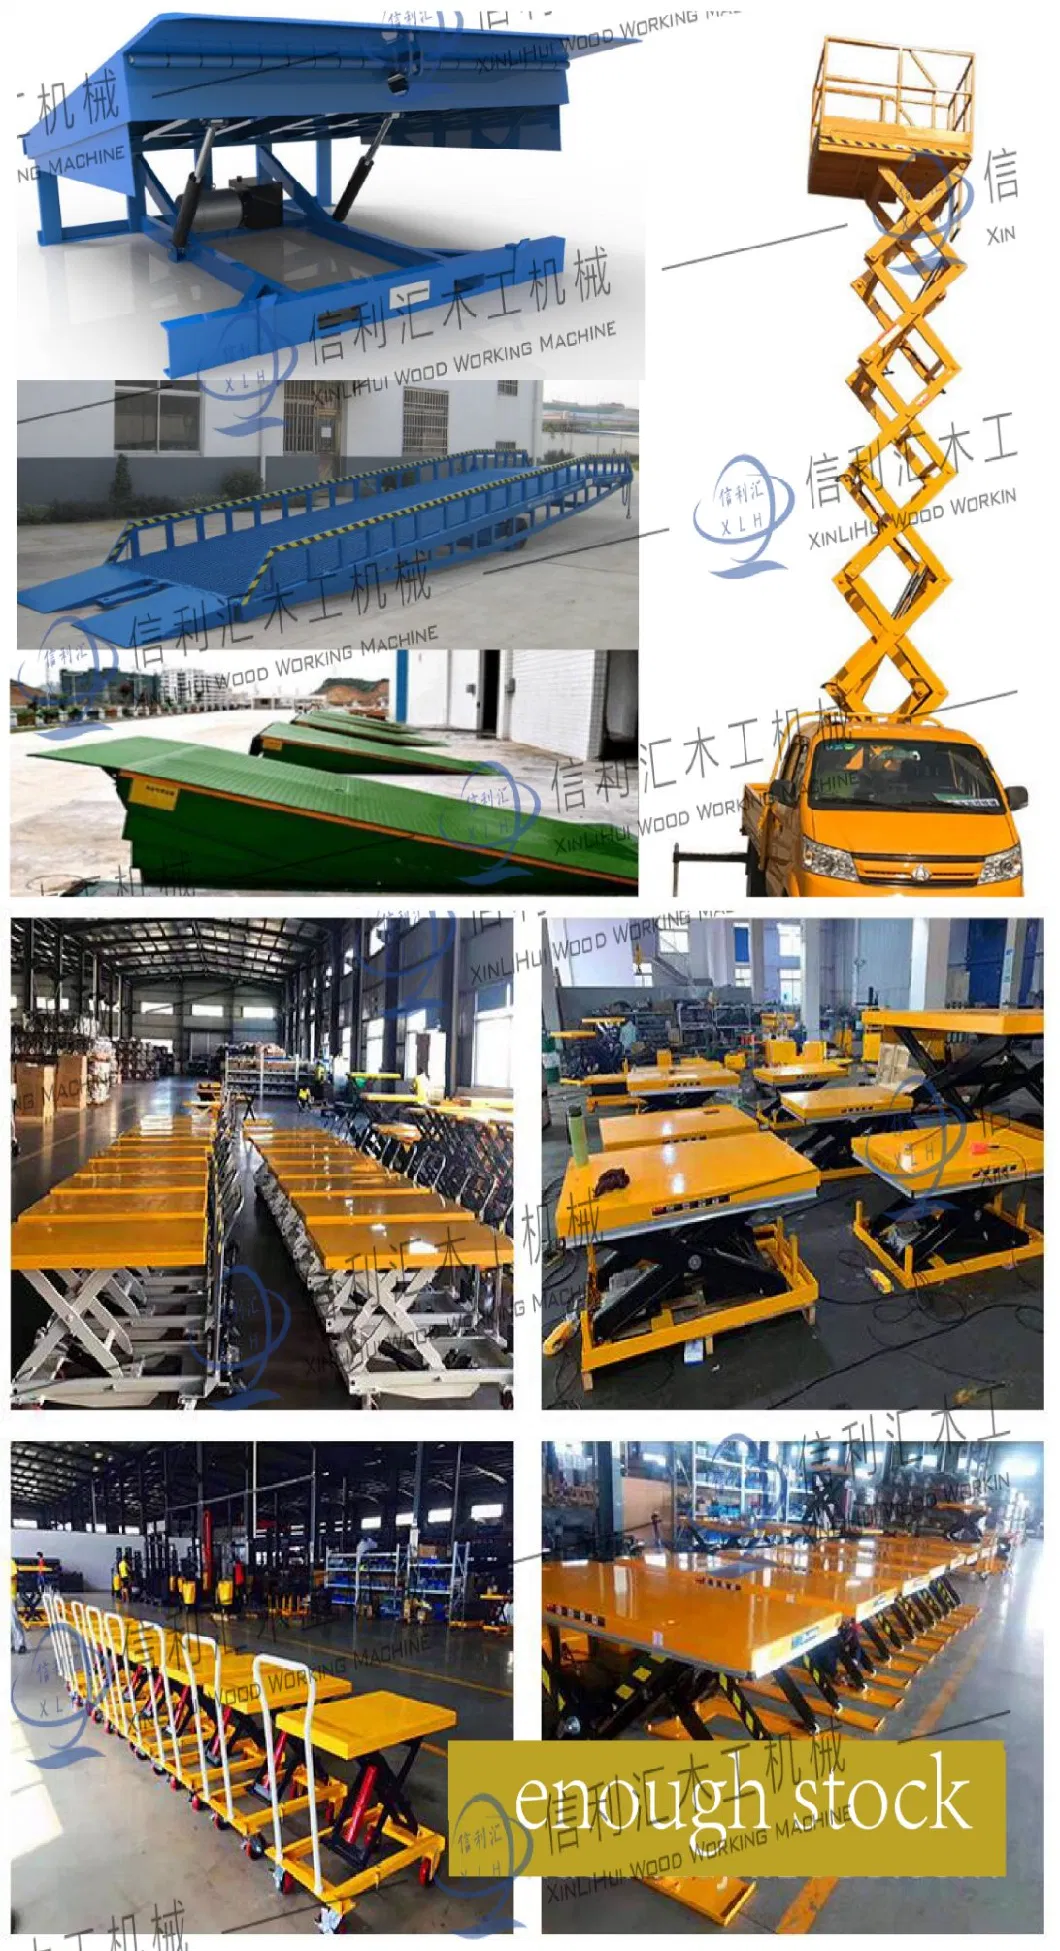 Automatic Hydraulic High Altitude 8 M 10 M Work Car Mobile Scissor Lift Self-Propelled Electric Lifting Working Platform Lifting Equipment